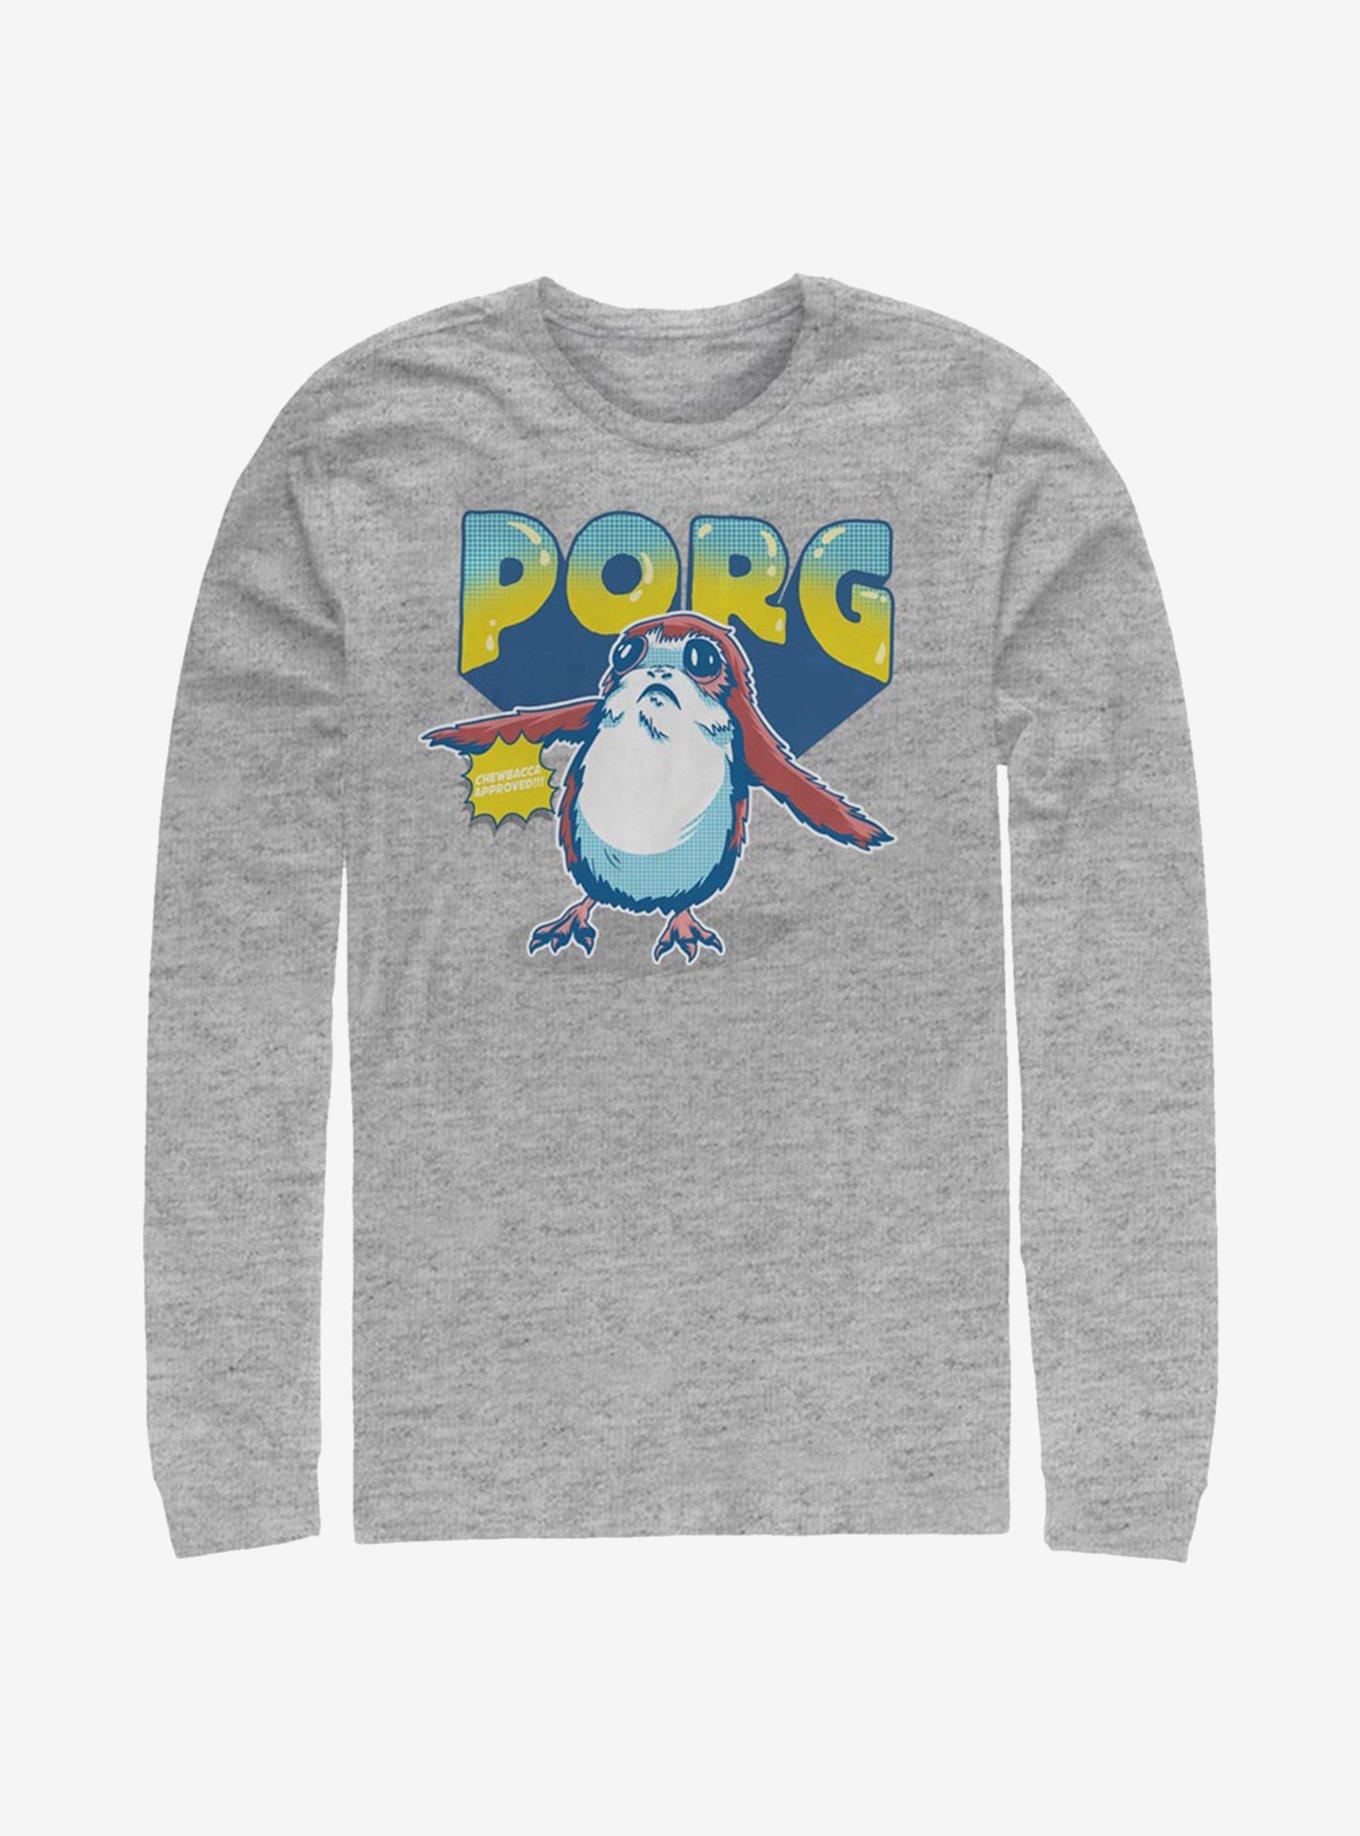 Star Wars: The Last Jedi Colorful Porg Long-Sleeve T-Shirt